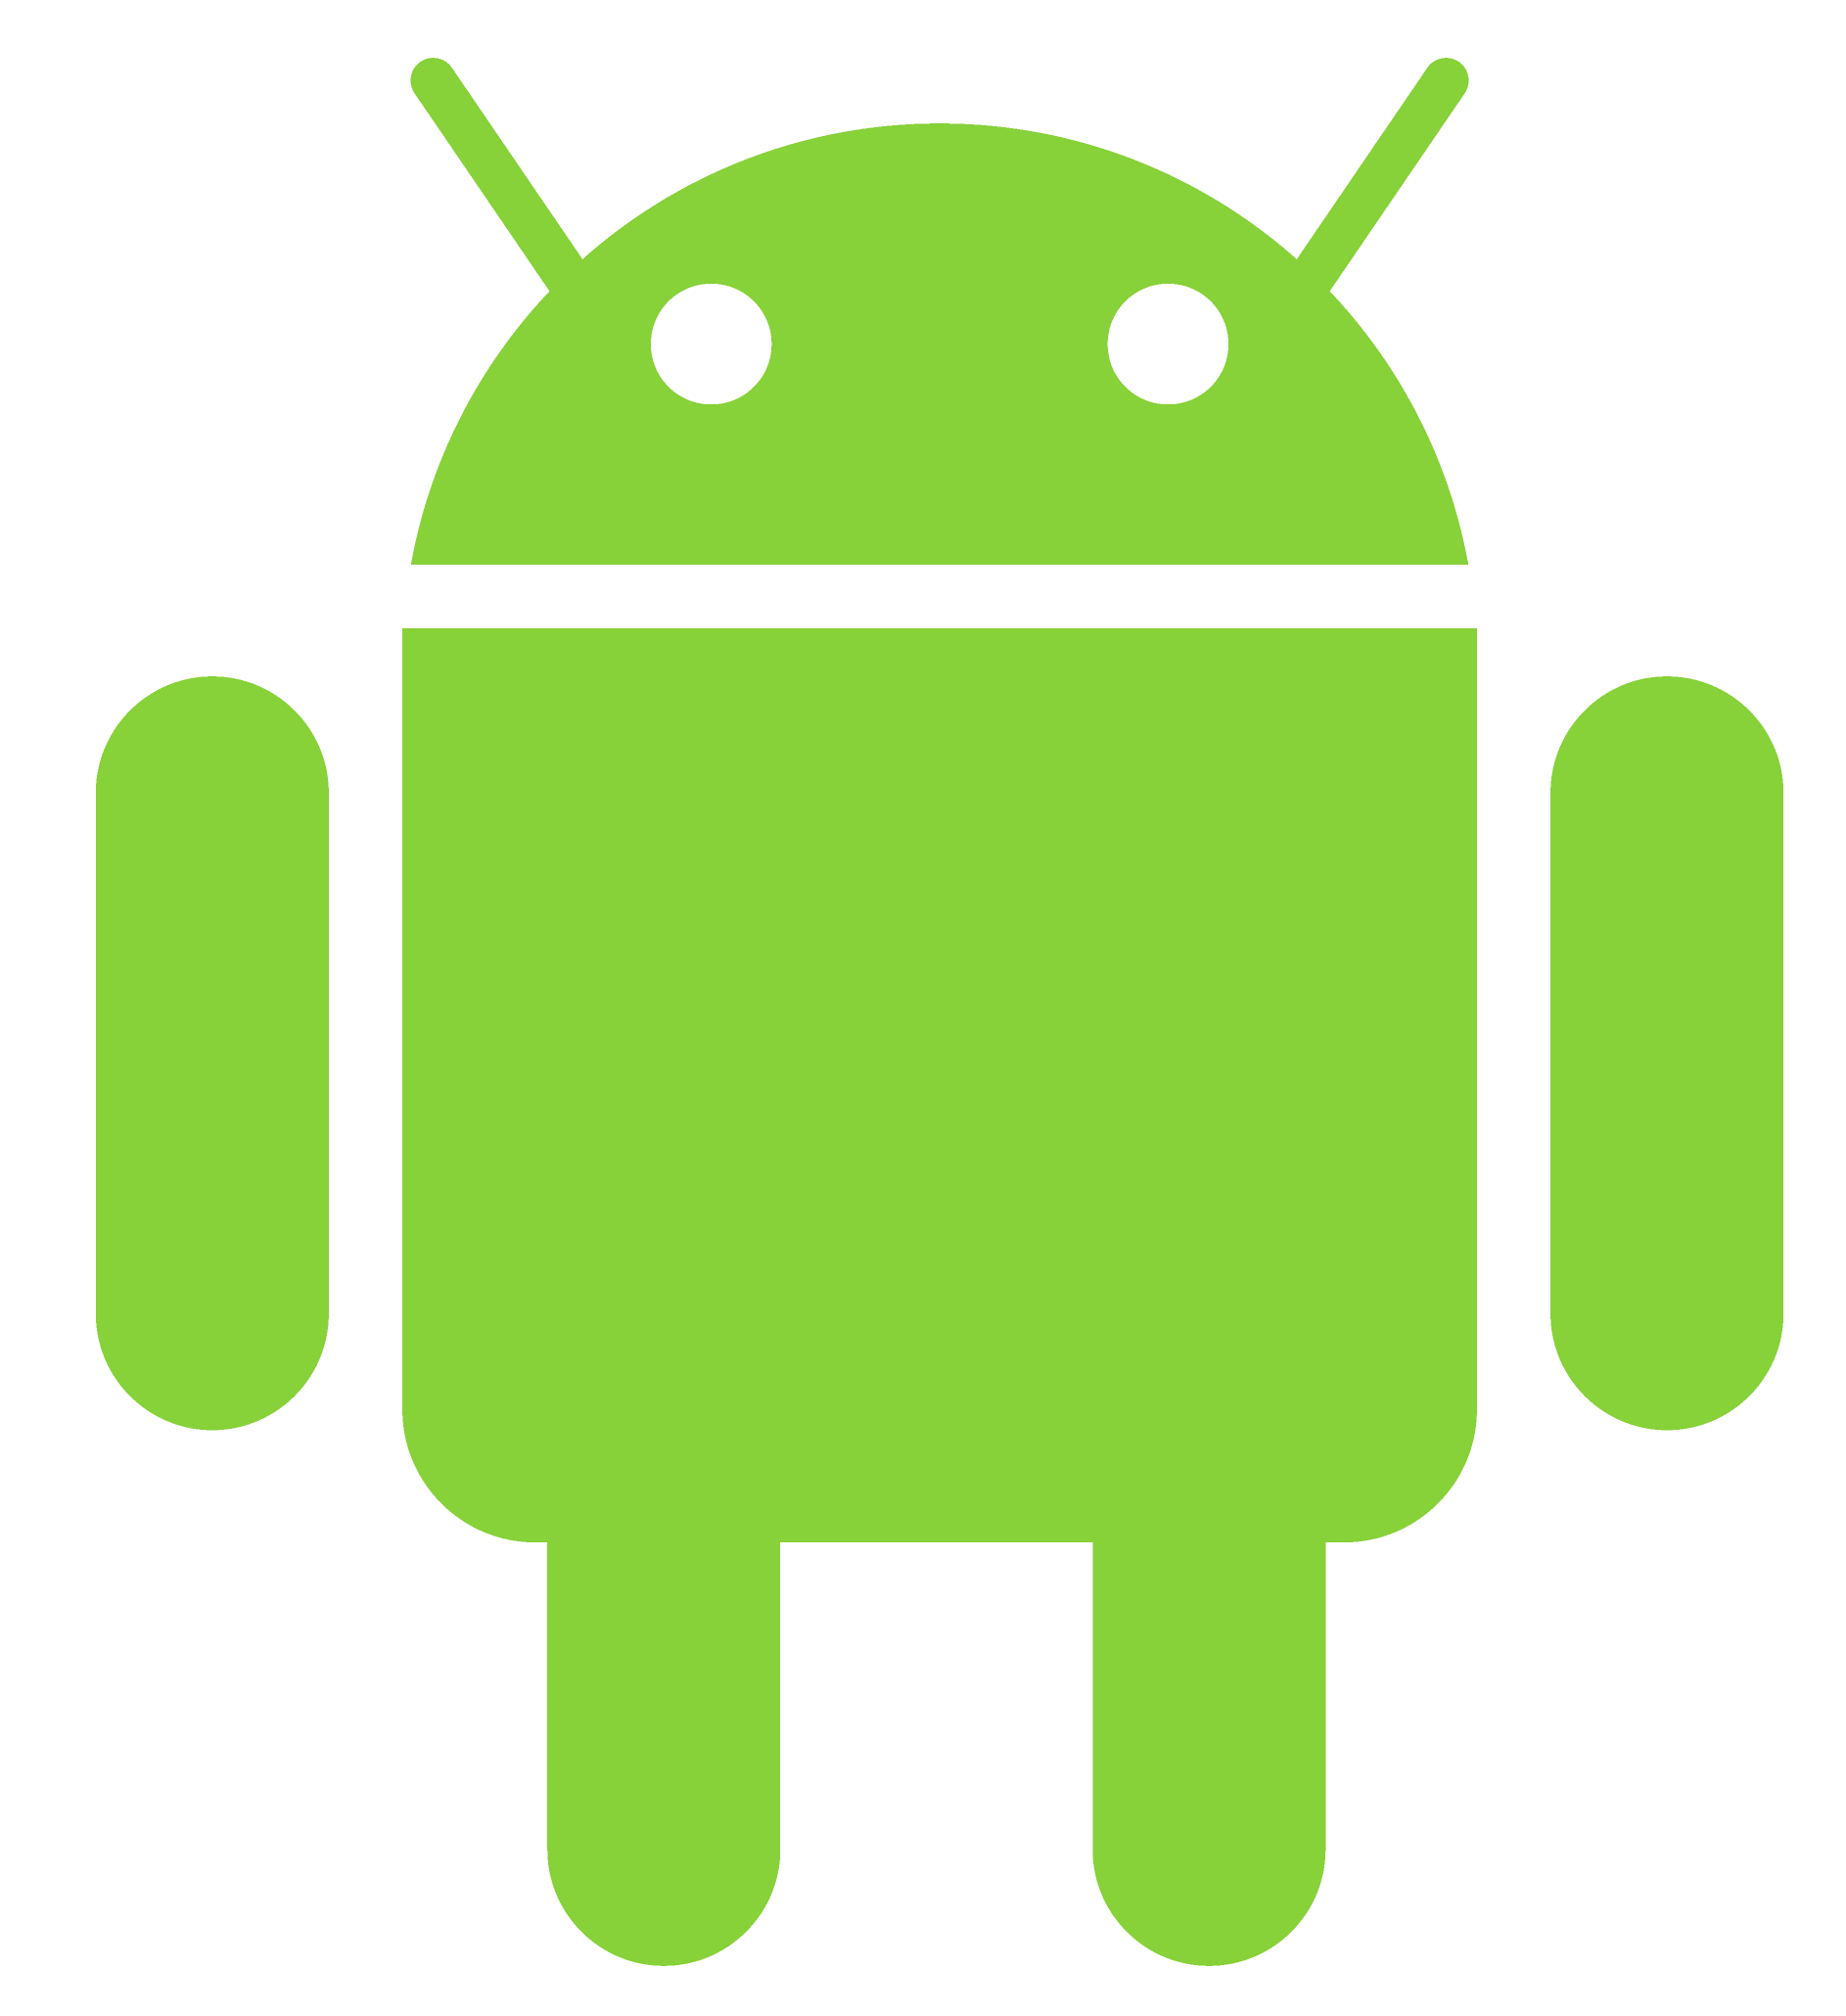 vecteezy android logo transparent png 23636232 83 e1695387270685